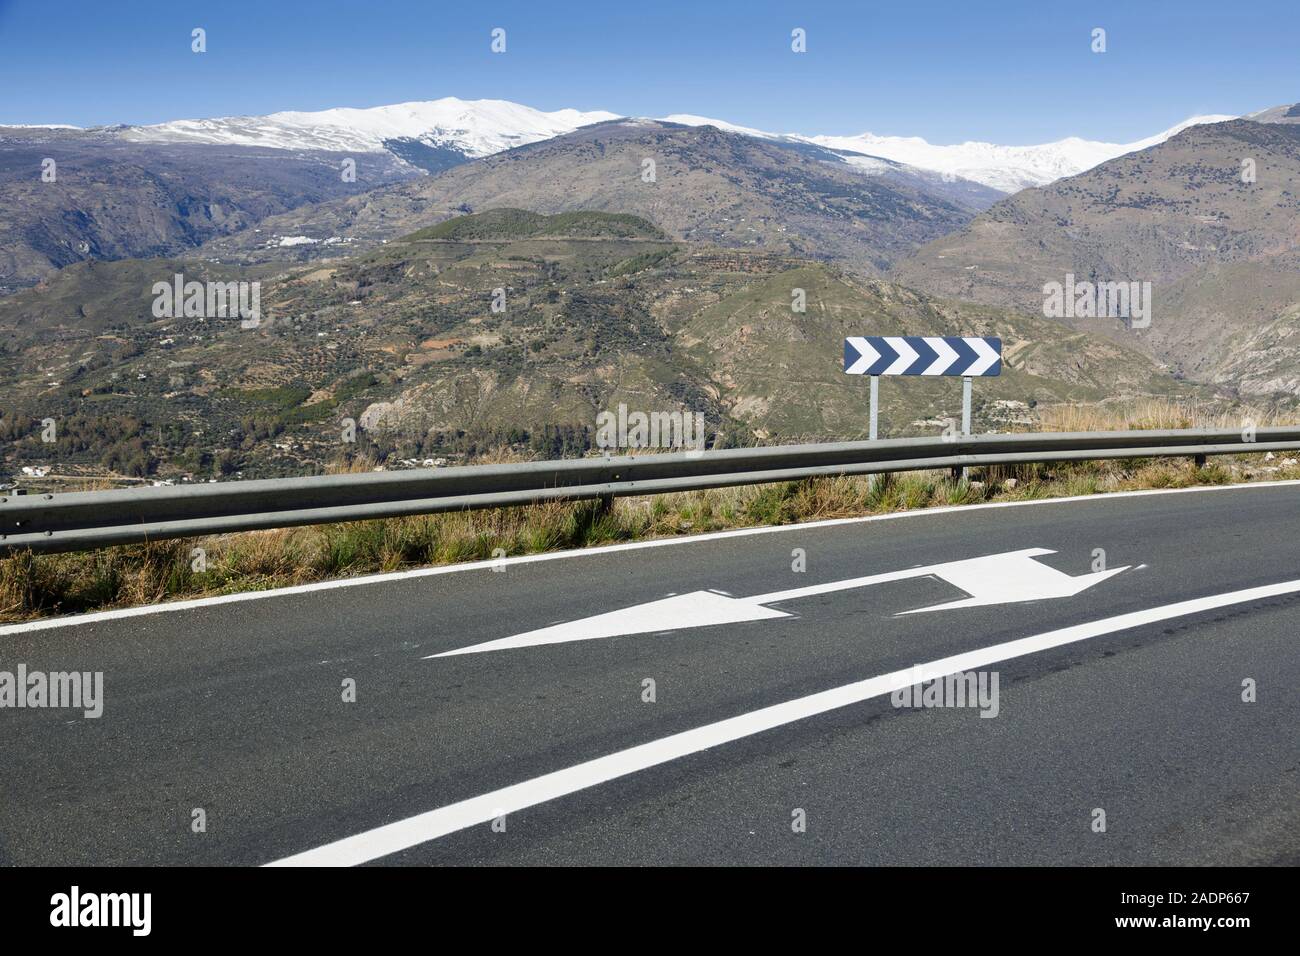 Directional arrows on the scenic A-348 road through the Alpujarra Valley between Órgiva and Torvizcón, Andalusia, Spain. Behind are the winter snow ca Stock Photo